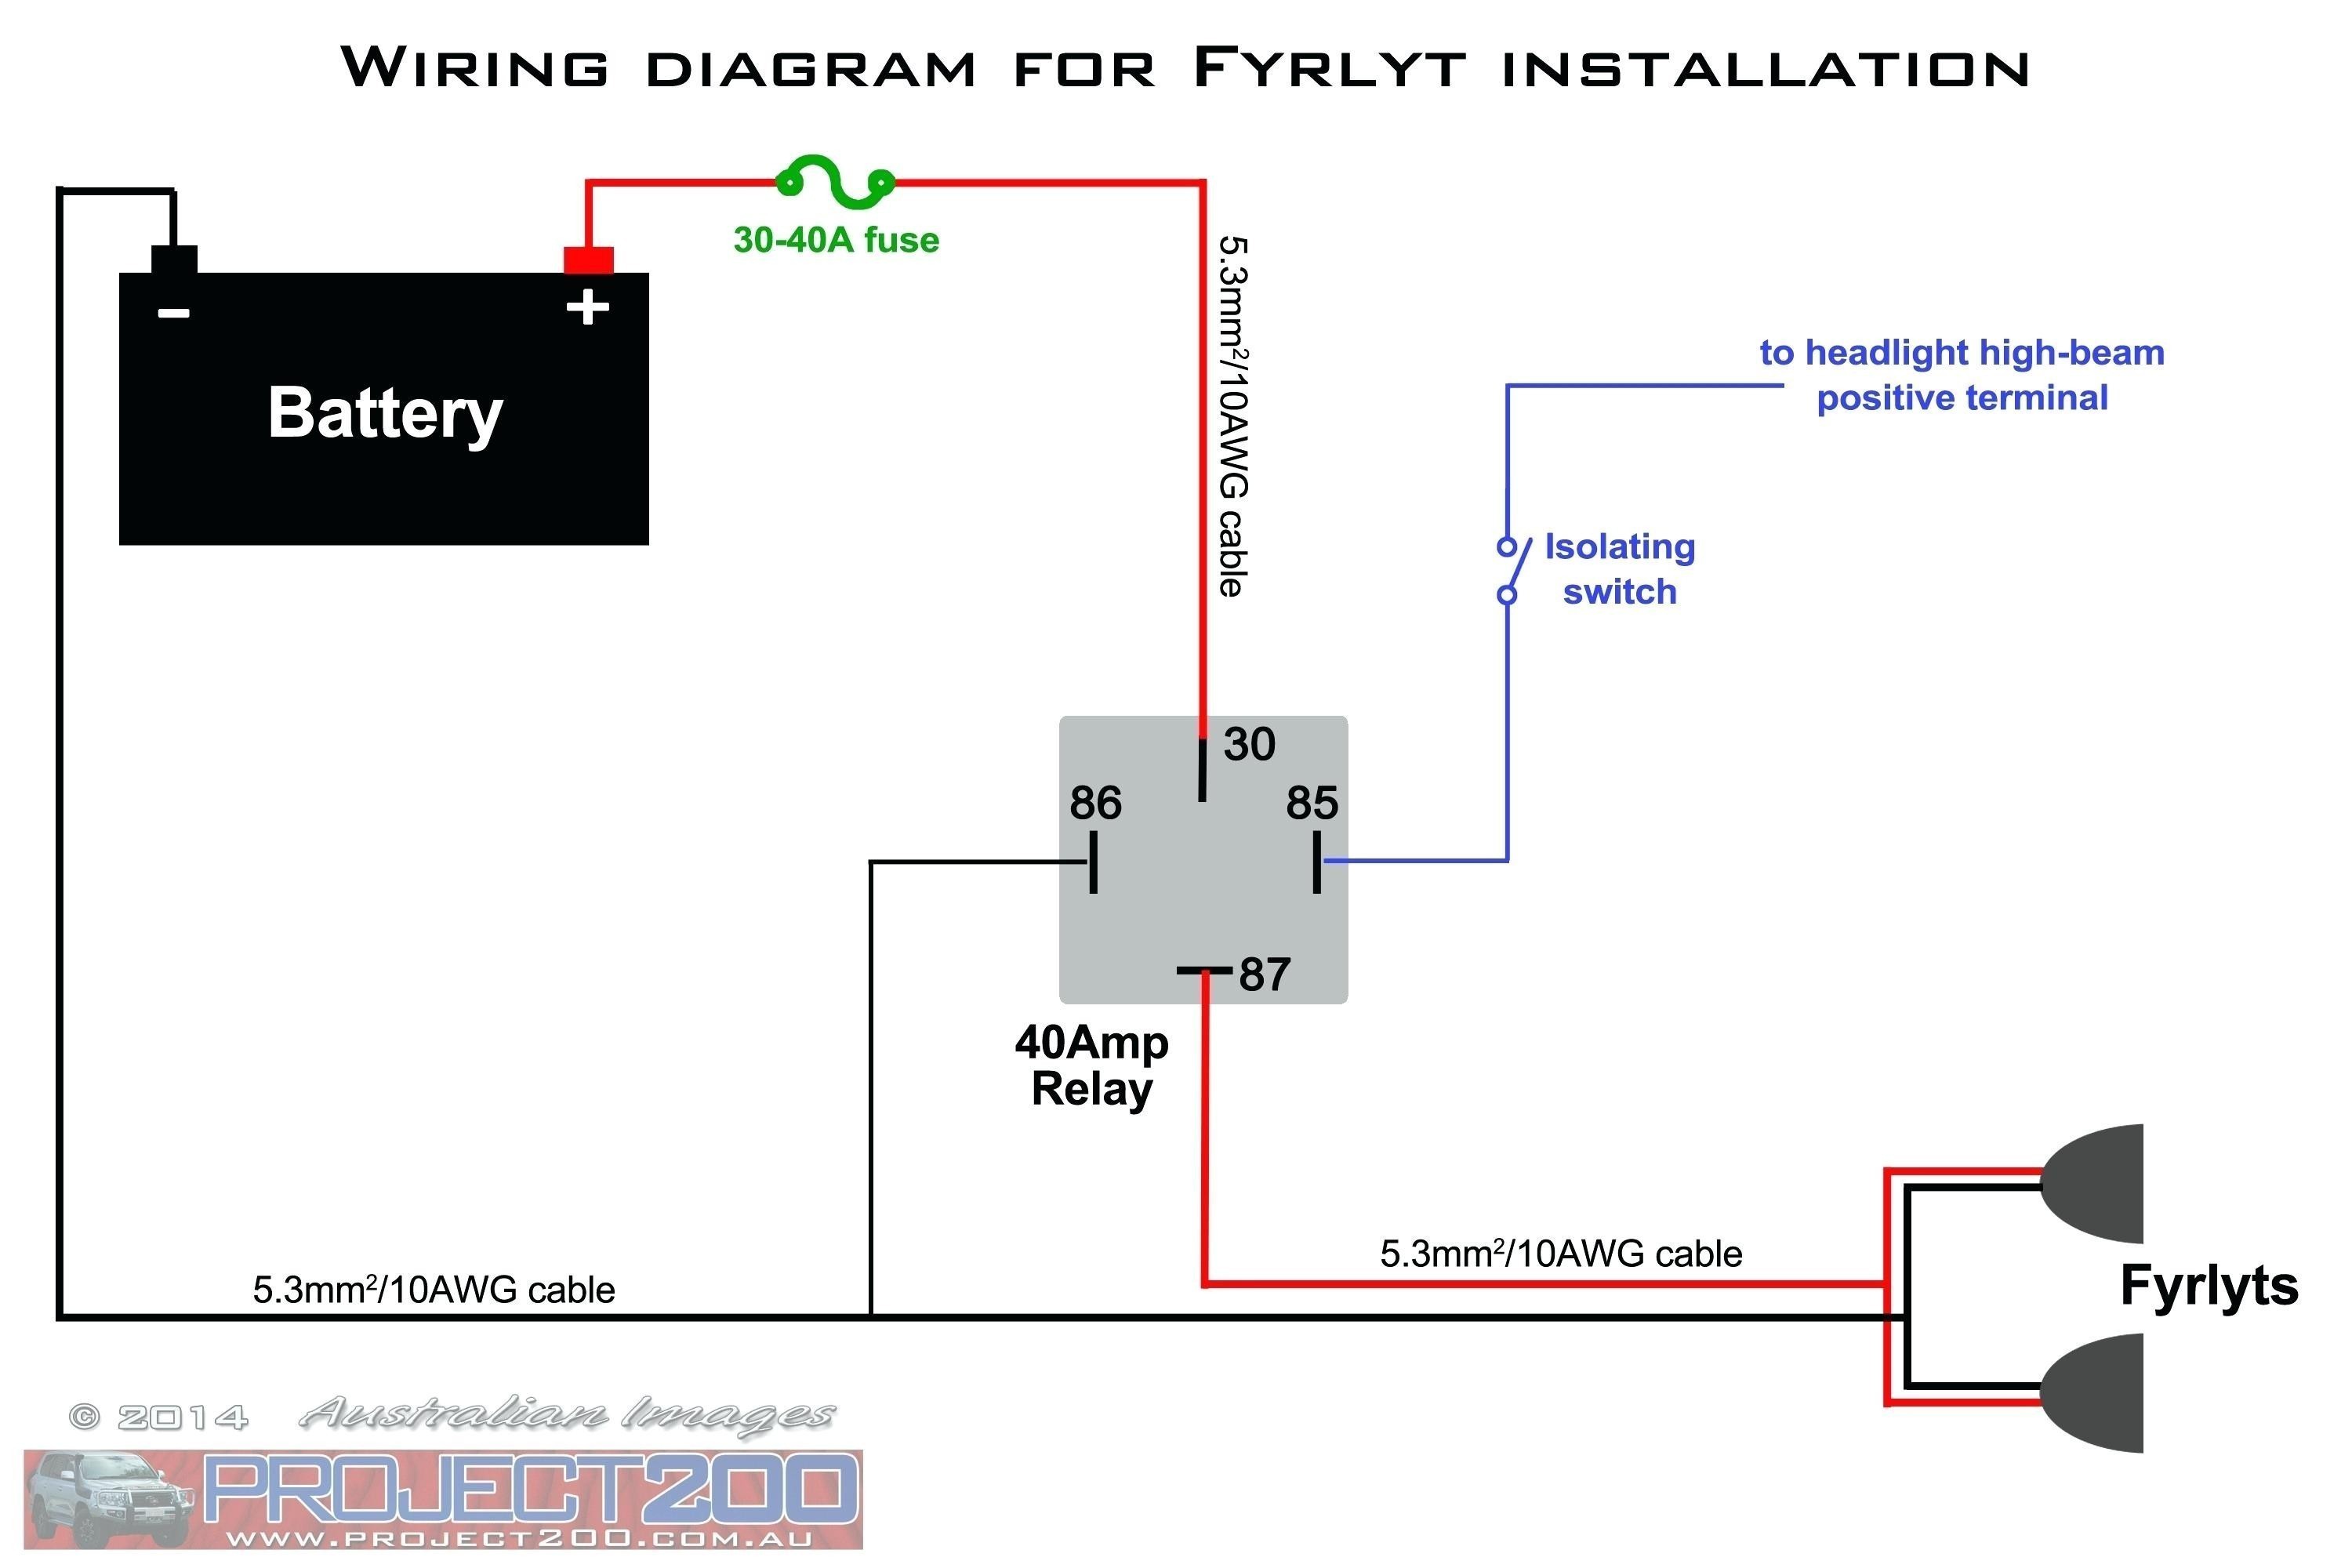 Wiring Diagrams For 6 Recessed Lighting In Series Valid Wiring Diagram For Series Lights Best Wiring Diagram Lights In